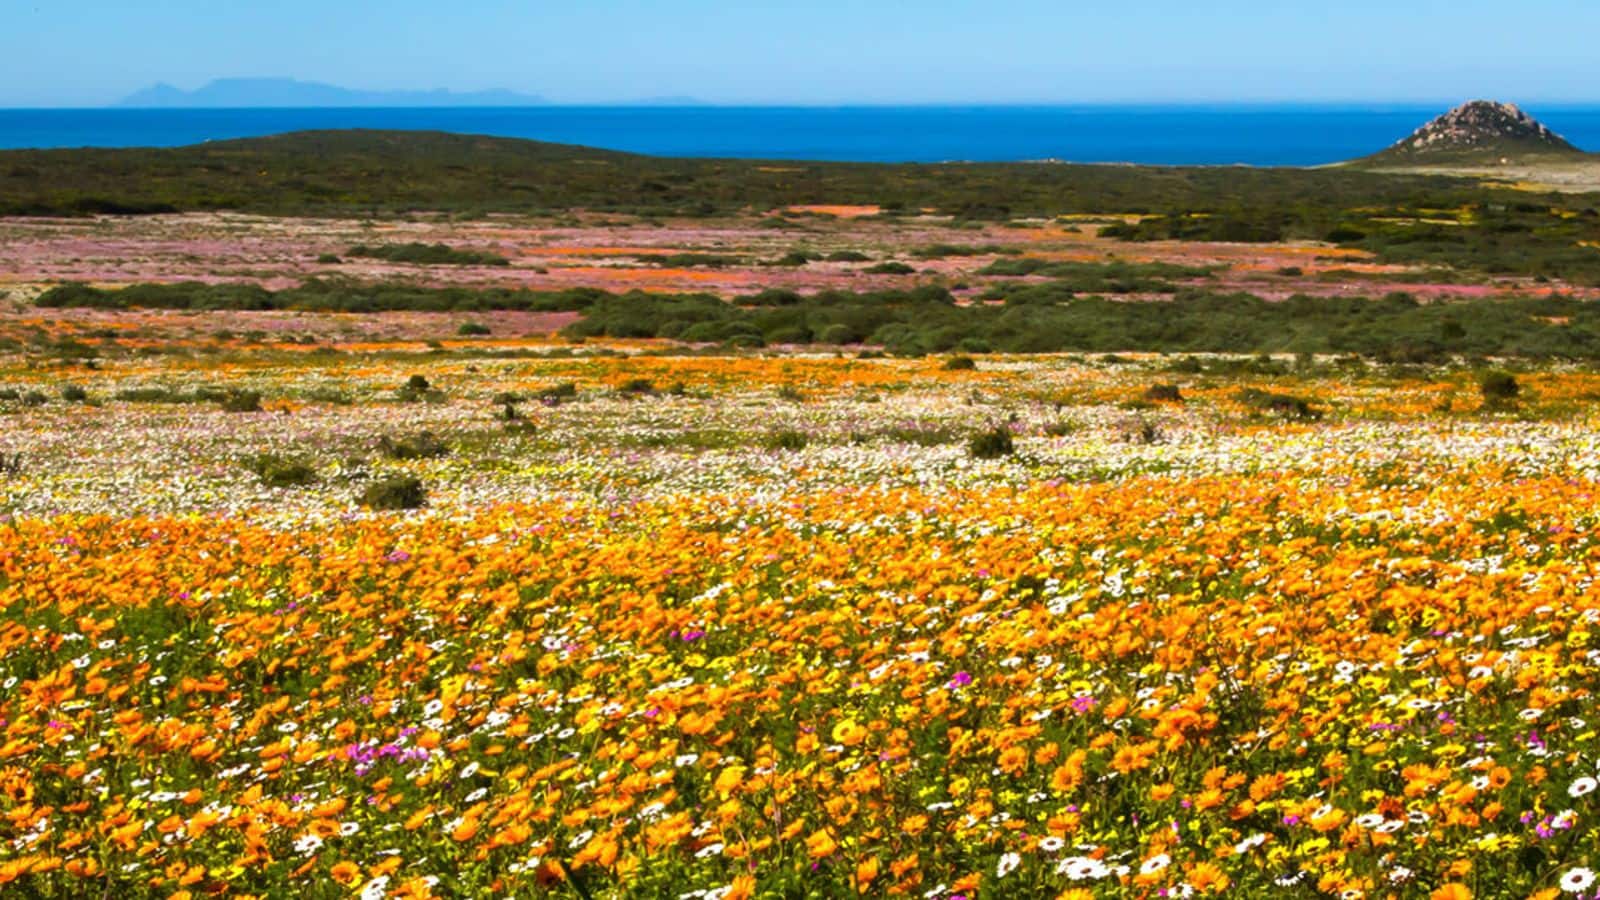 Discover Cape Town's floral wonders